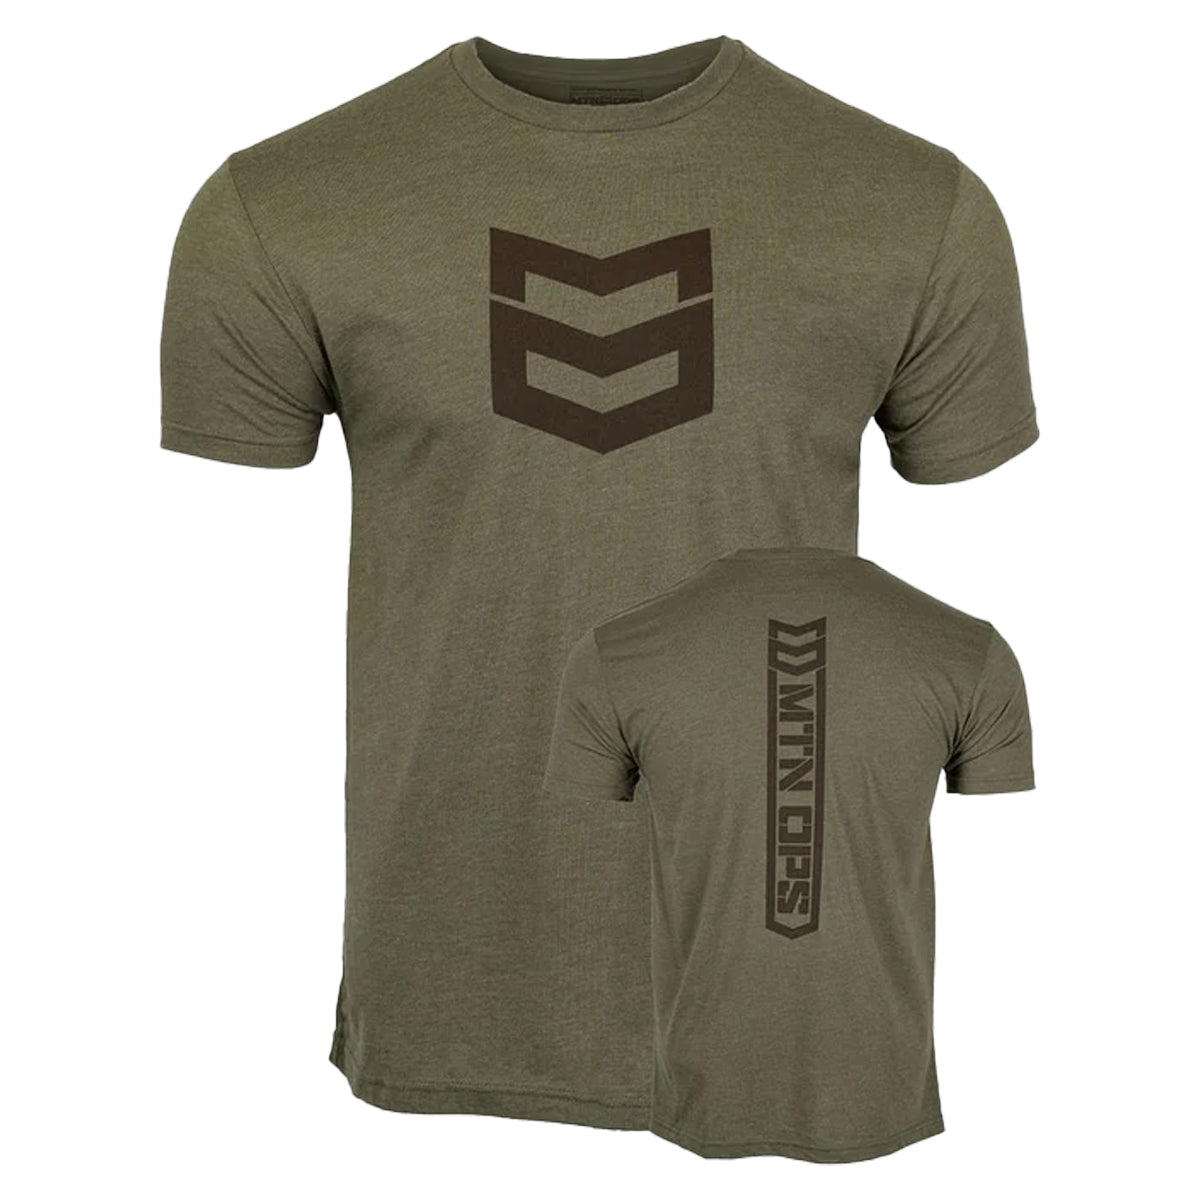 MTN OPS Stacked Tee in Loden by GOHUNT | Mtn Ops - GOHUNT Shop